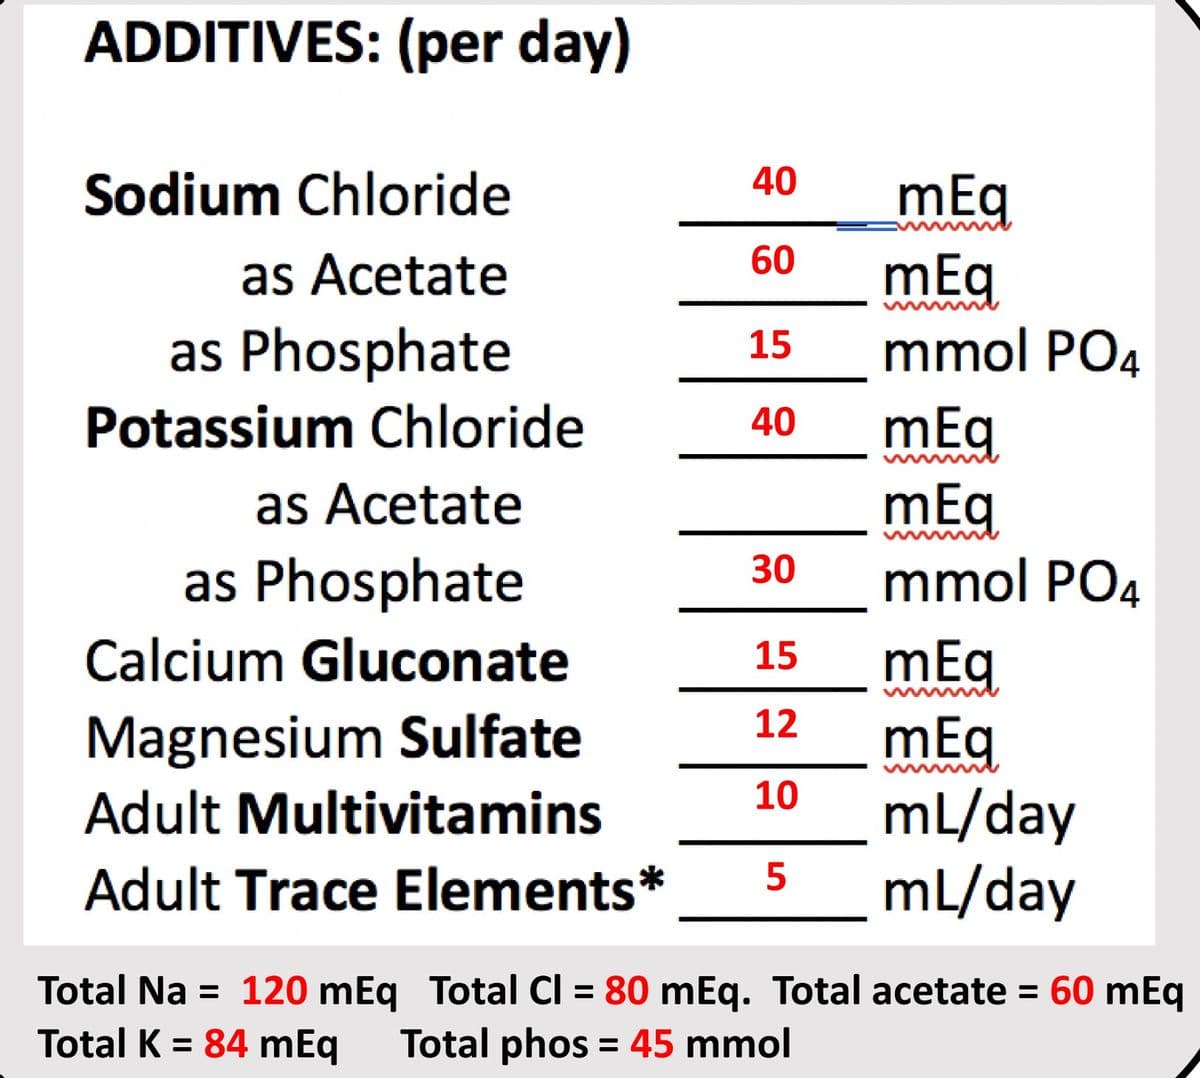 ADDITIVES: (per day)
Sodium Chloride
as Acetate
as Phosphate
Potassium Chloride
as Acetate
as Phosphate
Calcium Gluconate
Magnesium Sulfate
Adult Multivitamins
Adult Trace Elements*
40
60
15
40
30
15
12
10
5
mEq
mEq
mmol PO4
mEq
mEq
mmol PO4
mEq
mEq
mL/day
mL/day
Total Na = 120 mEq Total Cl = 80 mEq. Total acetate = 60 mEq
Total K = 84 mEq Total phos = 45 mmol